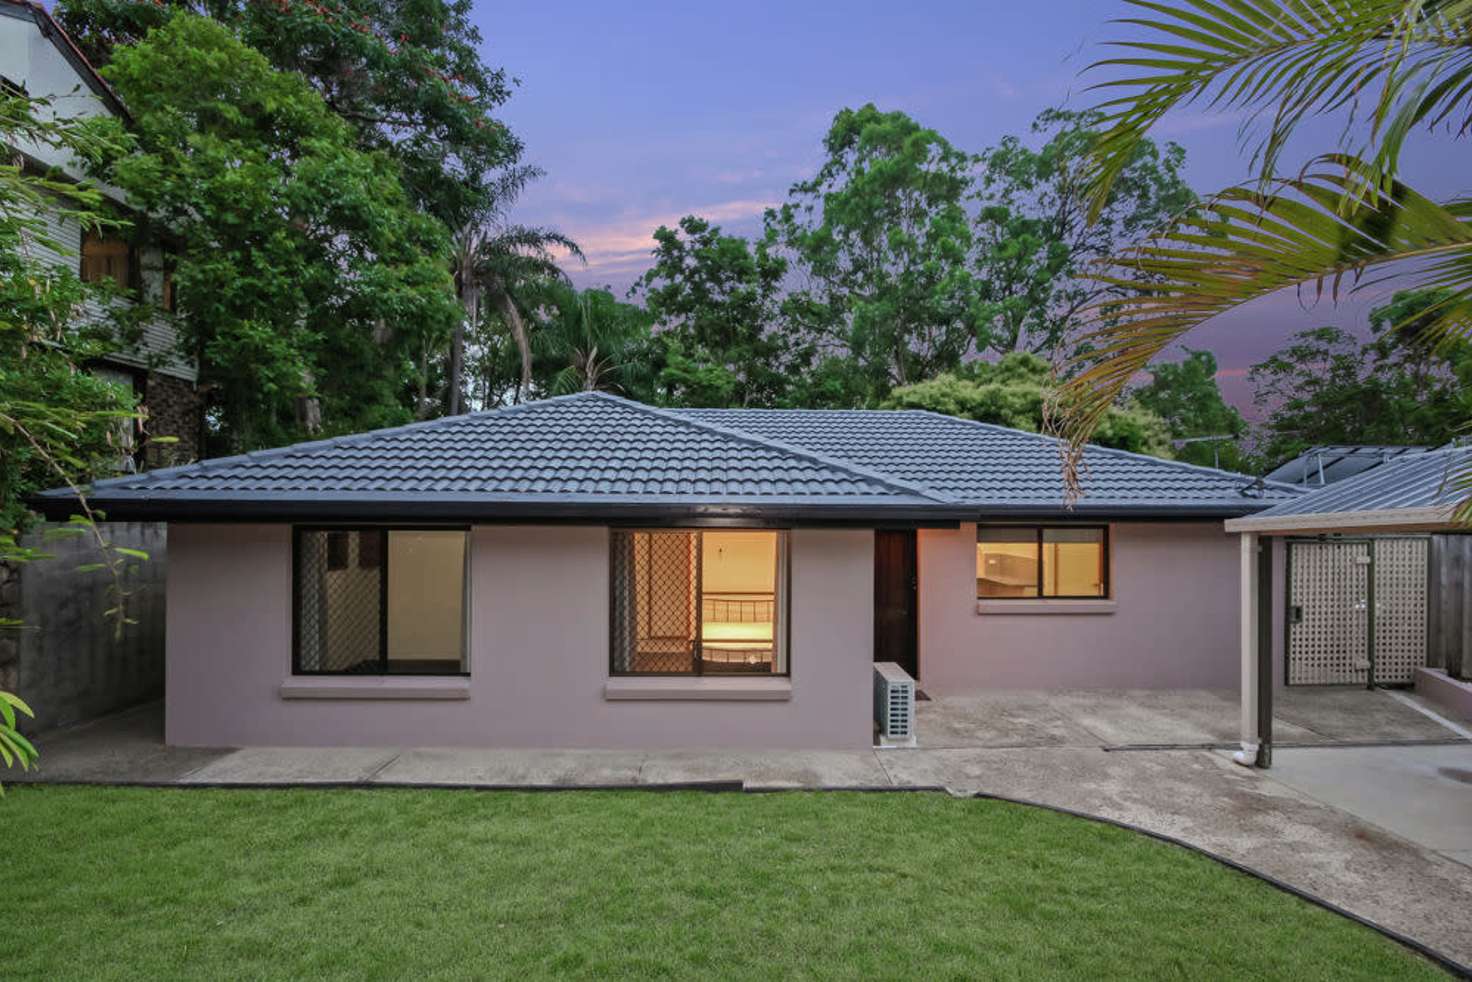 Main view of Homely house listing, 5 Eveleigh Street, Arana Hills QLD 4054